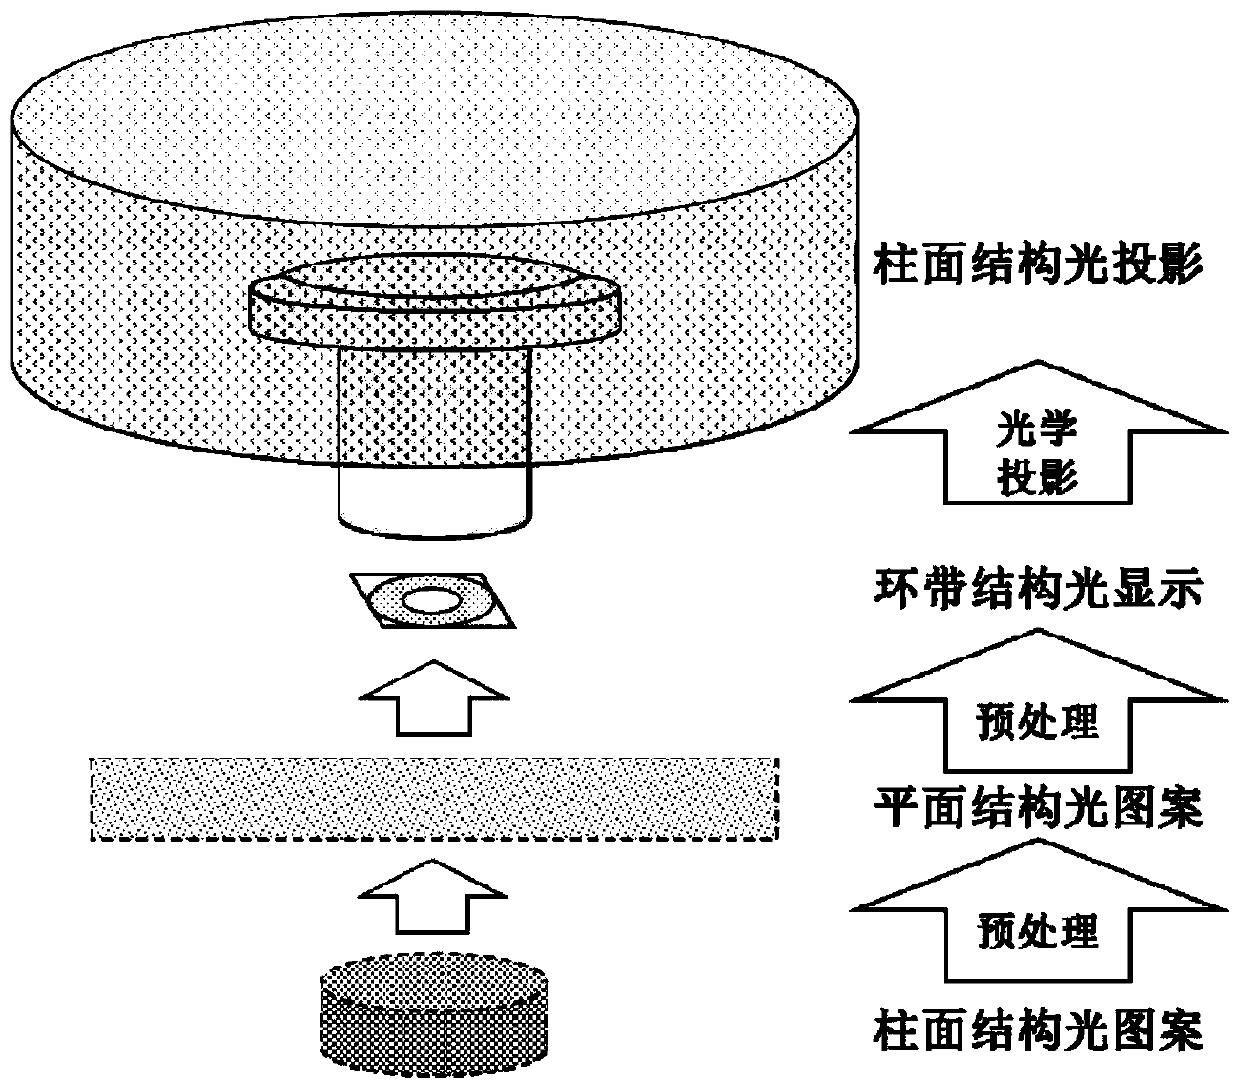 Panoramic ring projection objective based cylindrical structured light projection device